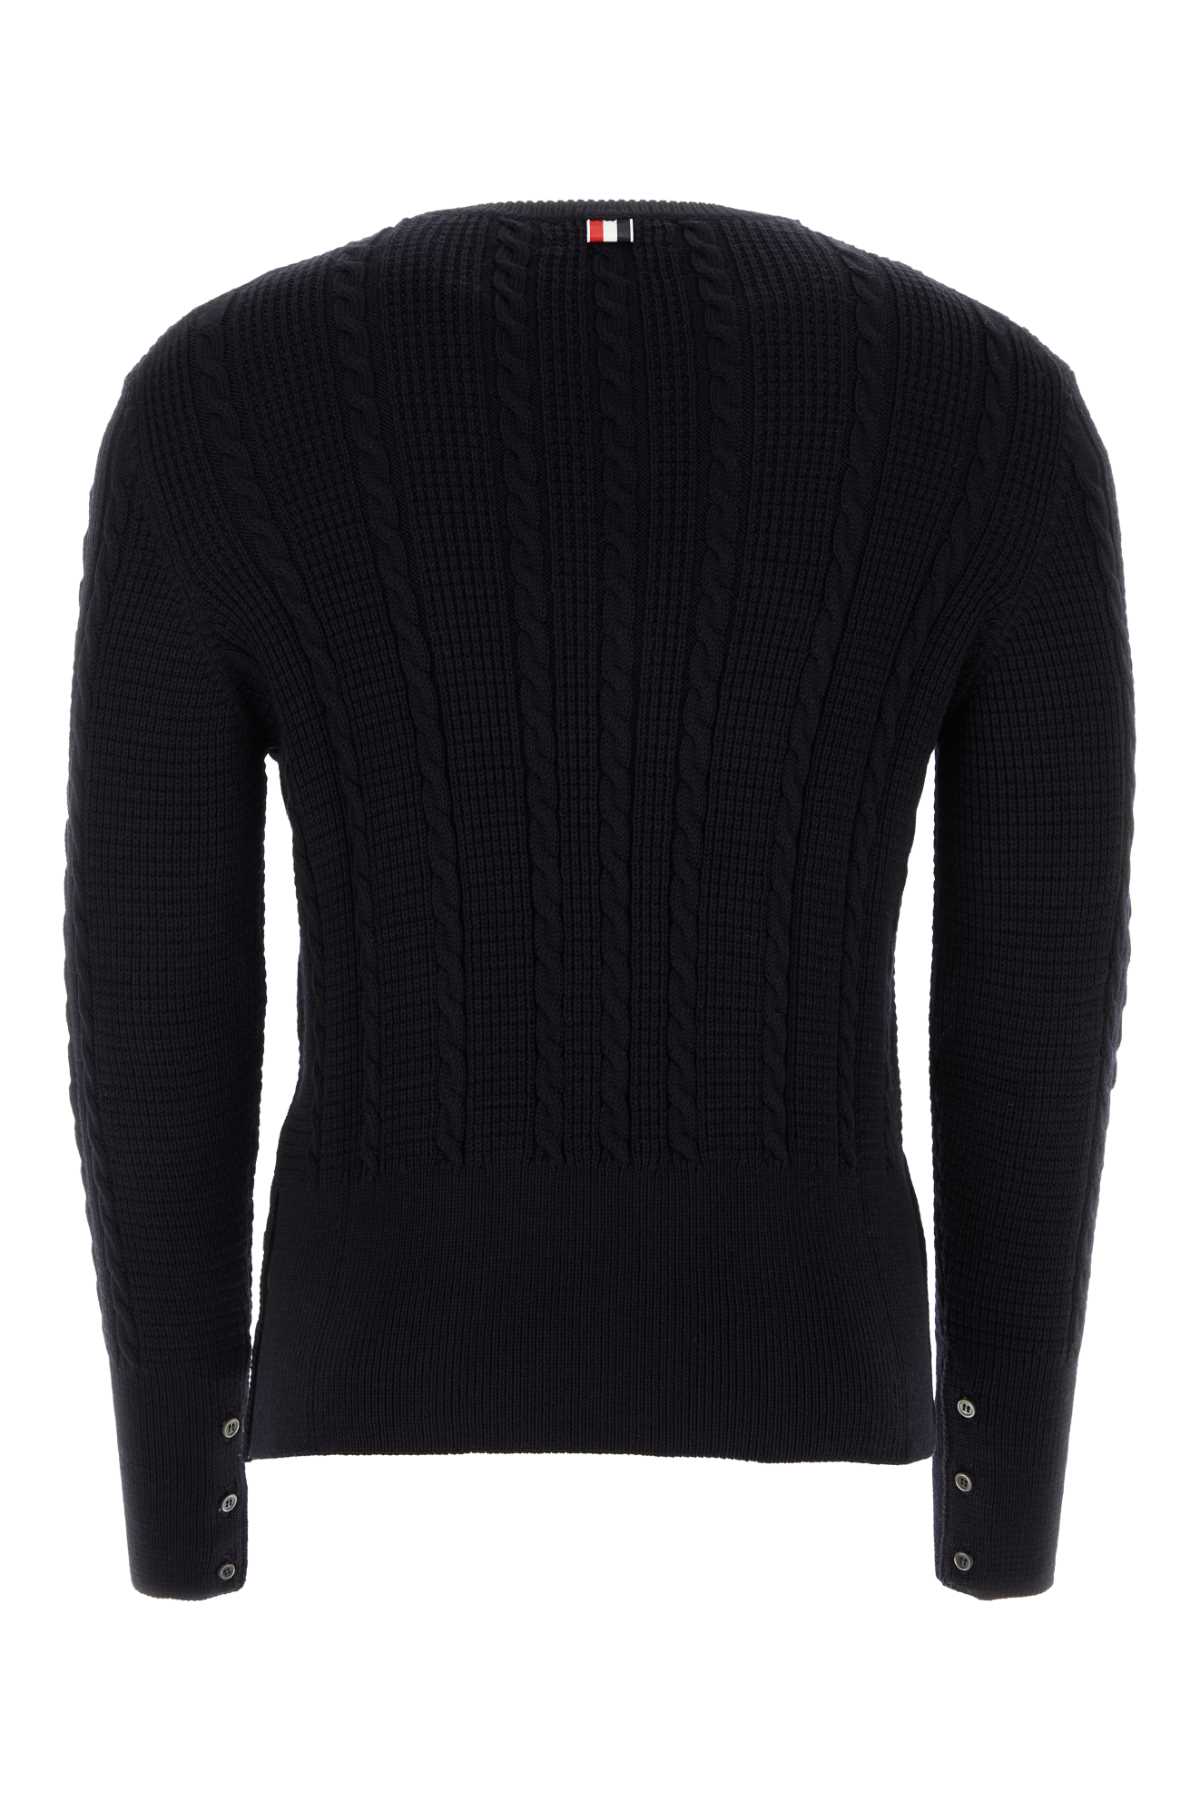 Thom Browne Midnight Wool Sweater In Navy